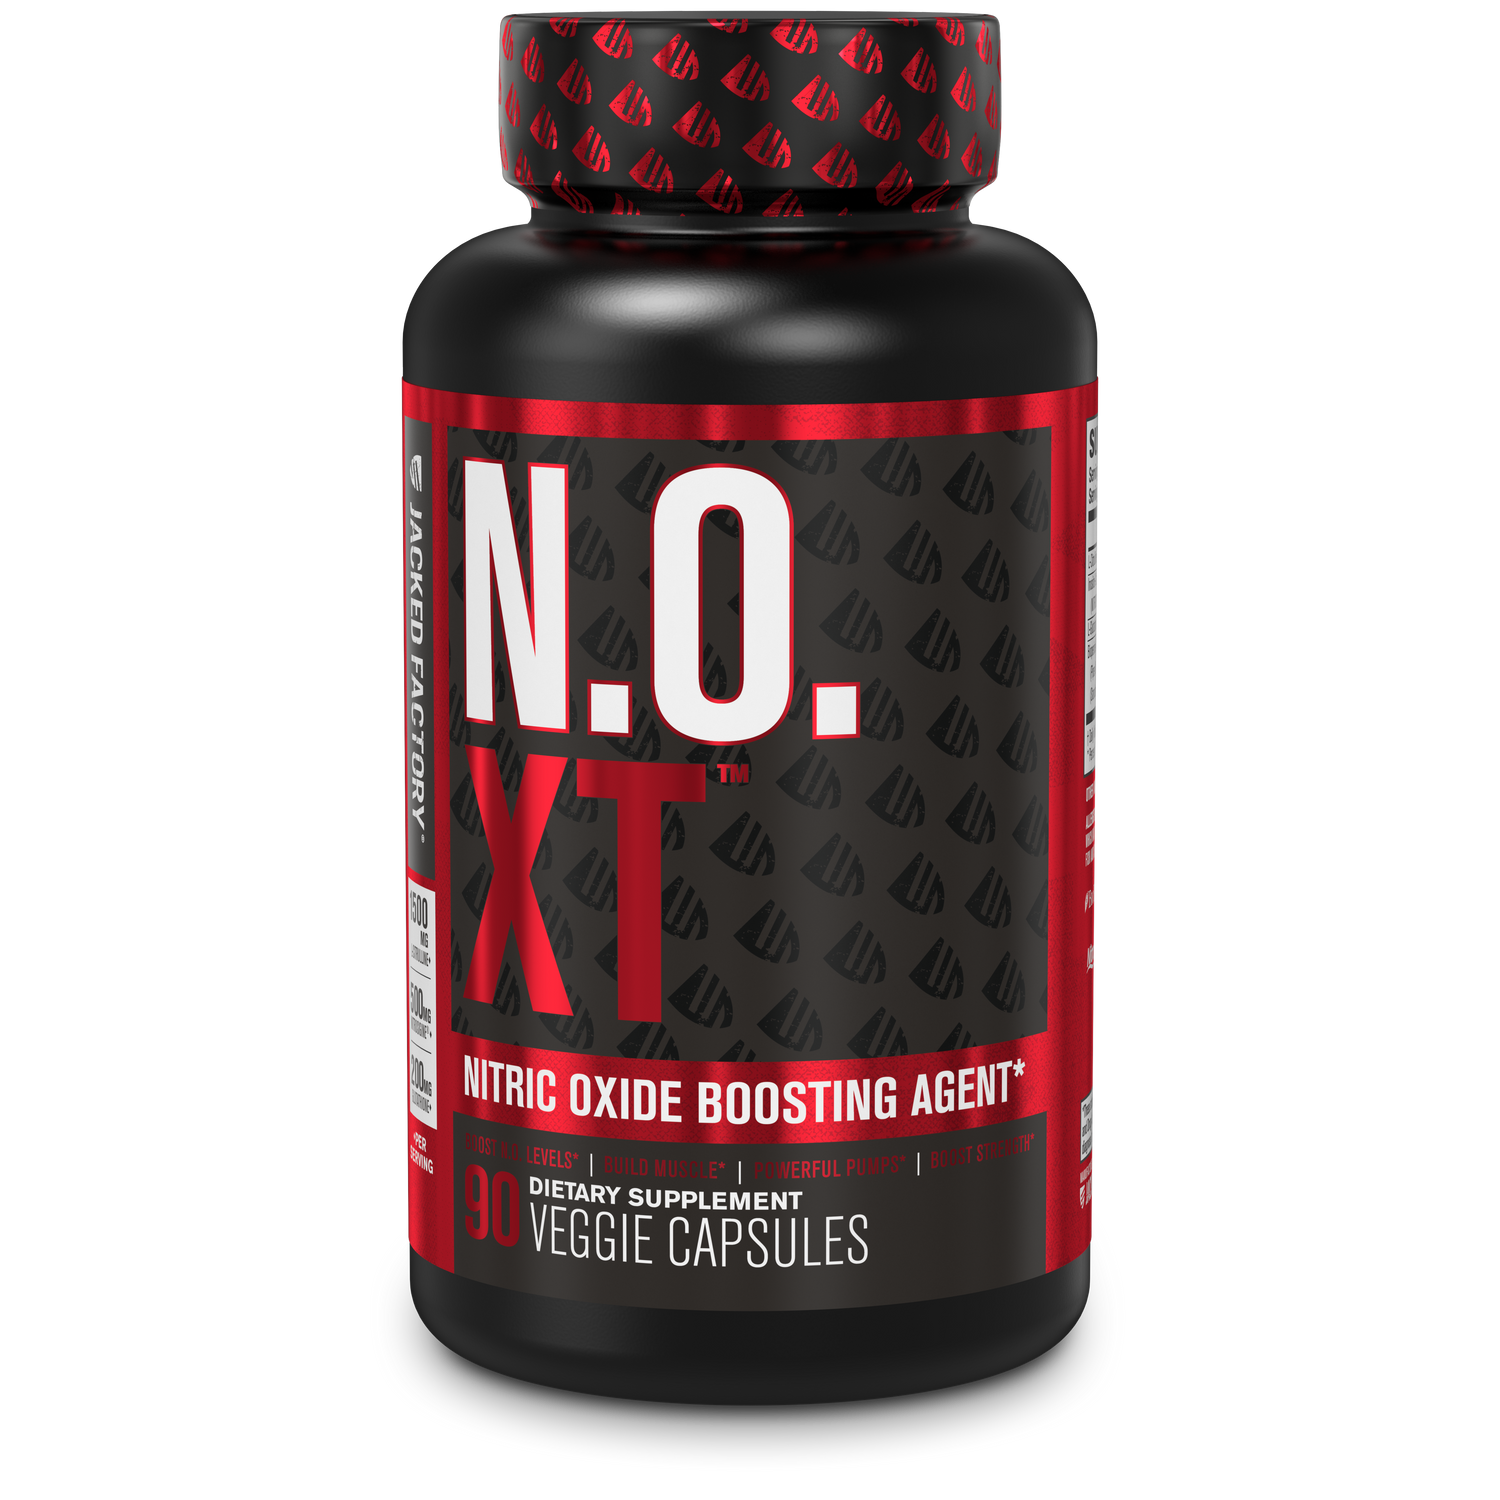 Jacked Factory's N.O. XT (90 veggie capsules) in a black bottle with red label